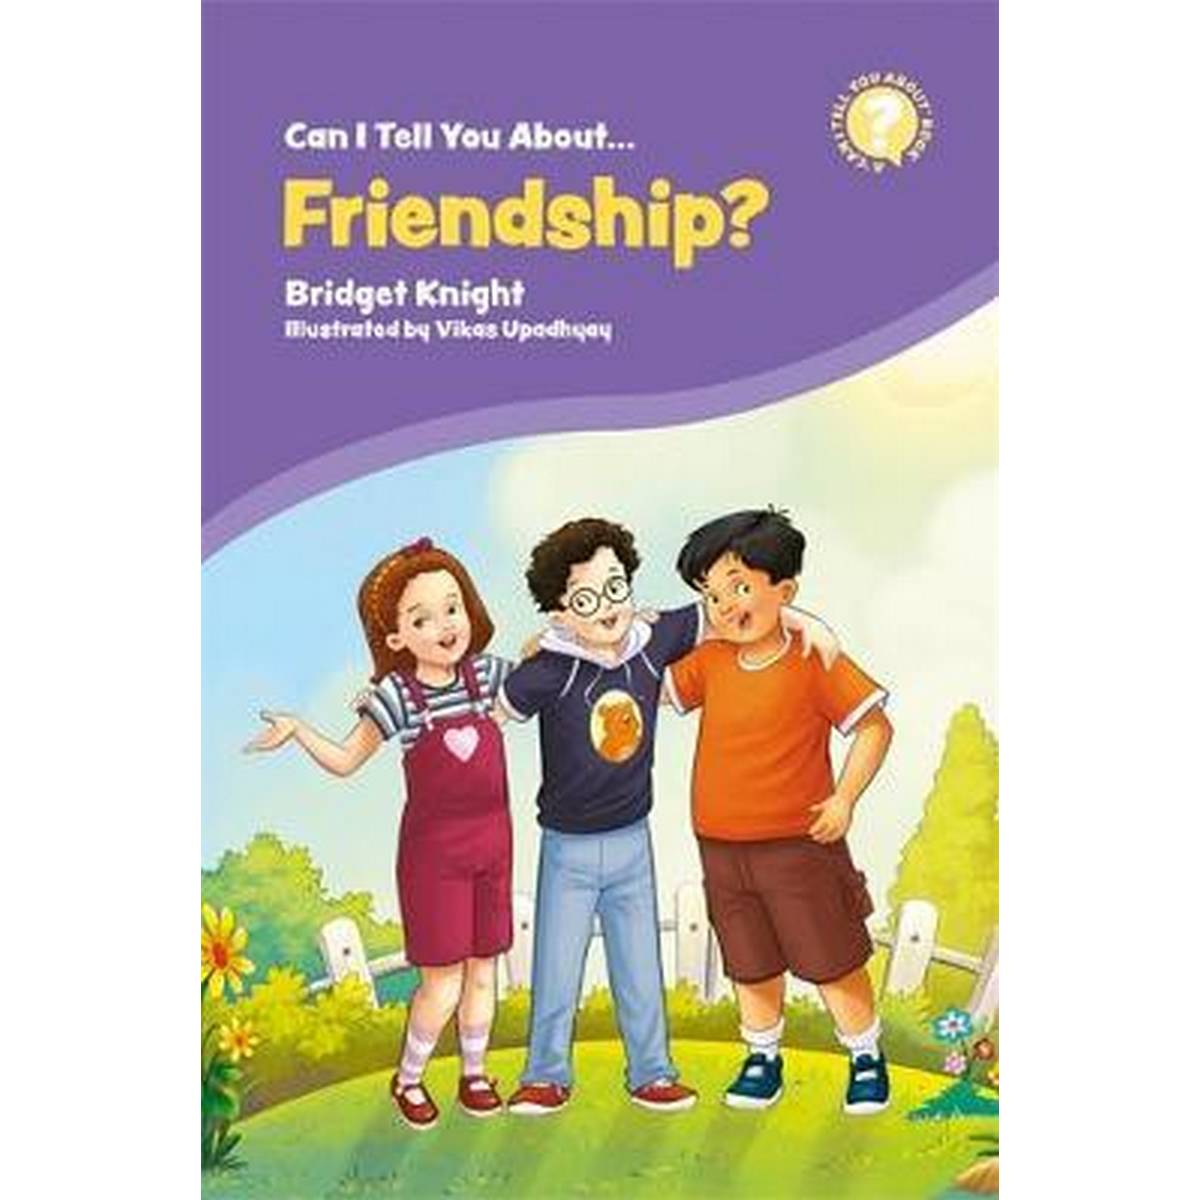 Can I Tell You About Friendship? - A Helpful Introduction for Everyone